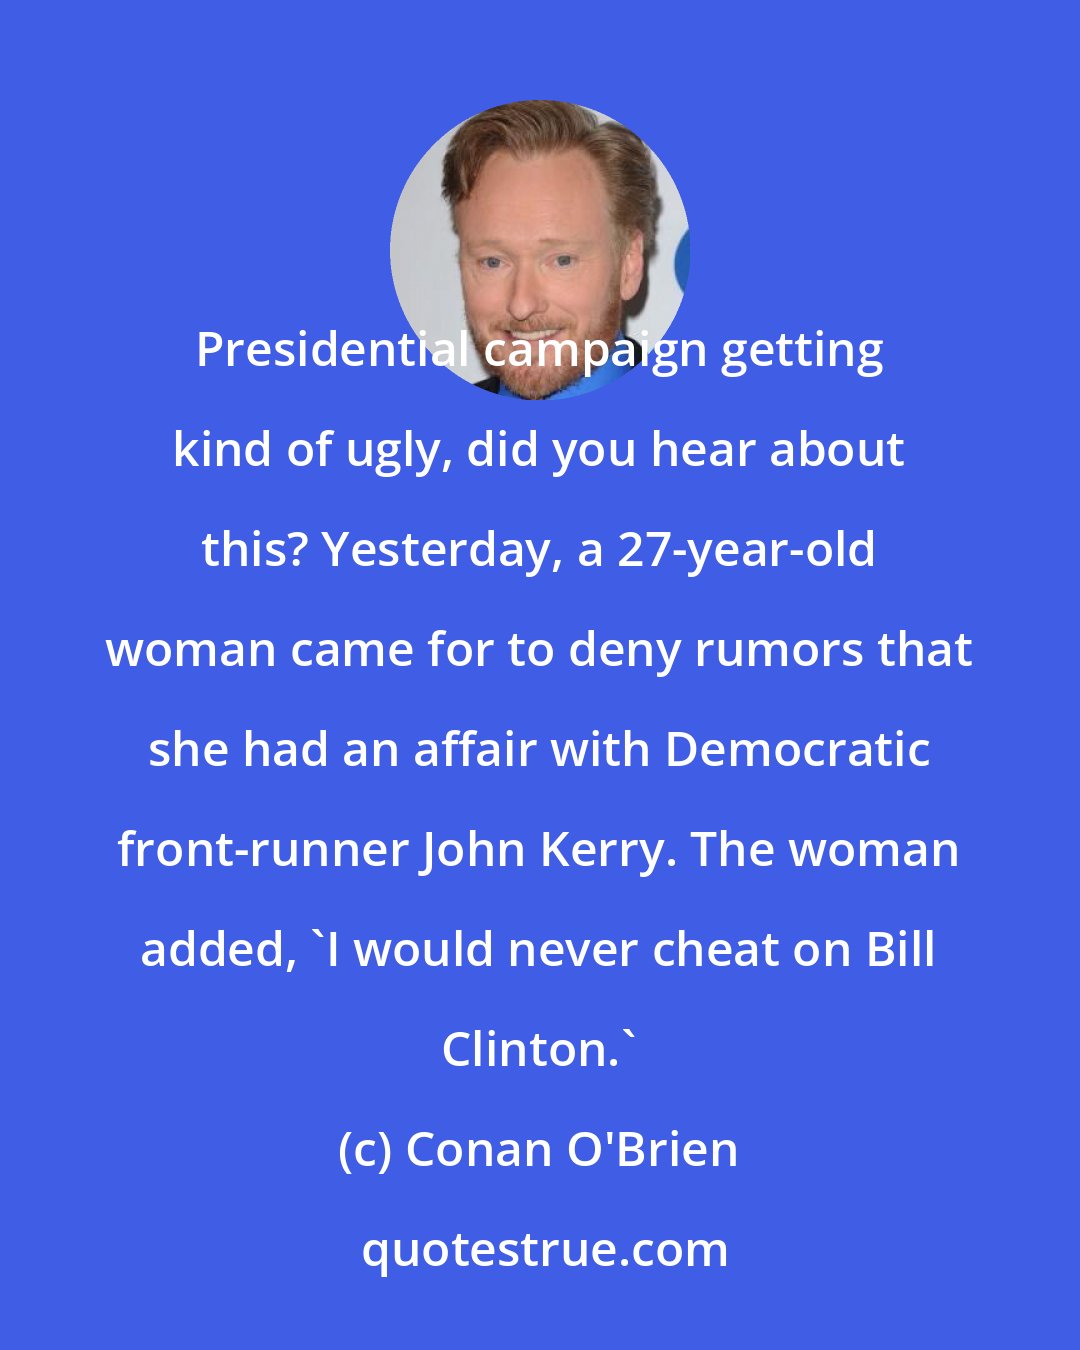 Conan O'Brien: Presidential campaign getting kind of ugly, did you hear about this? Yesterday, a 27-year-old woman came for to deny rumors that she had an affair with Democratic front-runner John Kerry. The woman added, 'I would never cheat on Bill Clinton.'